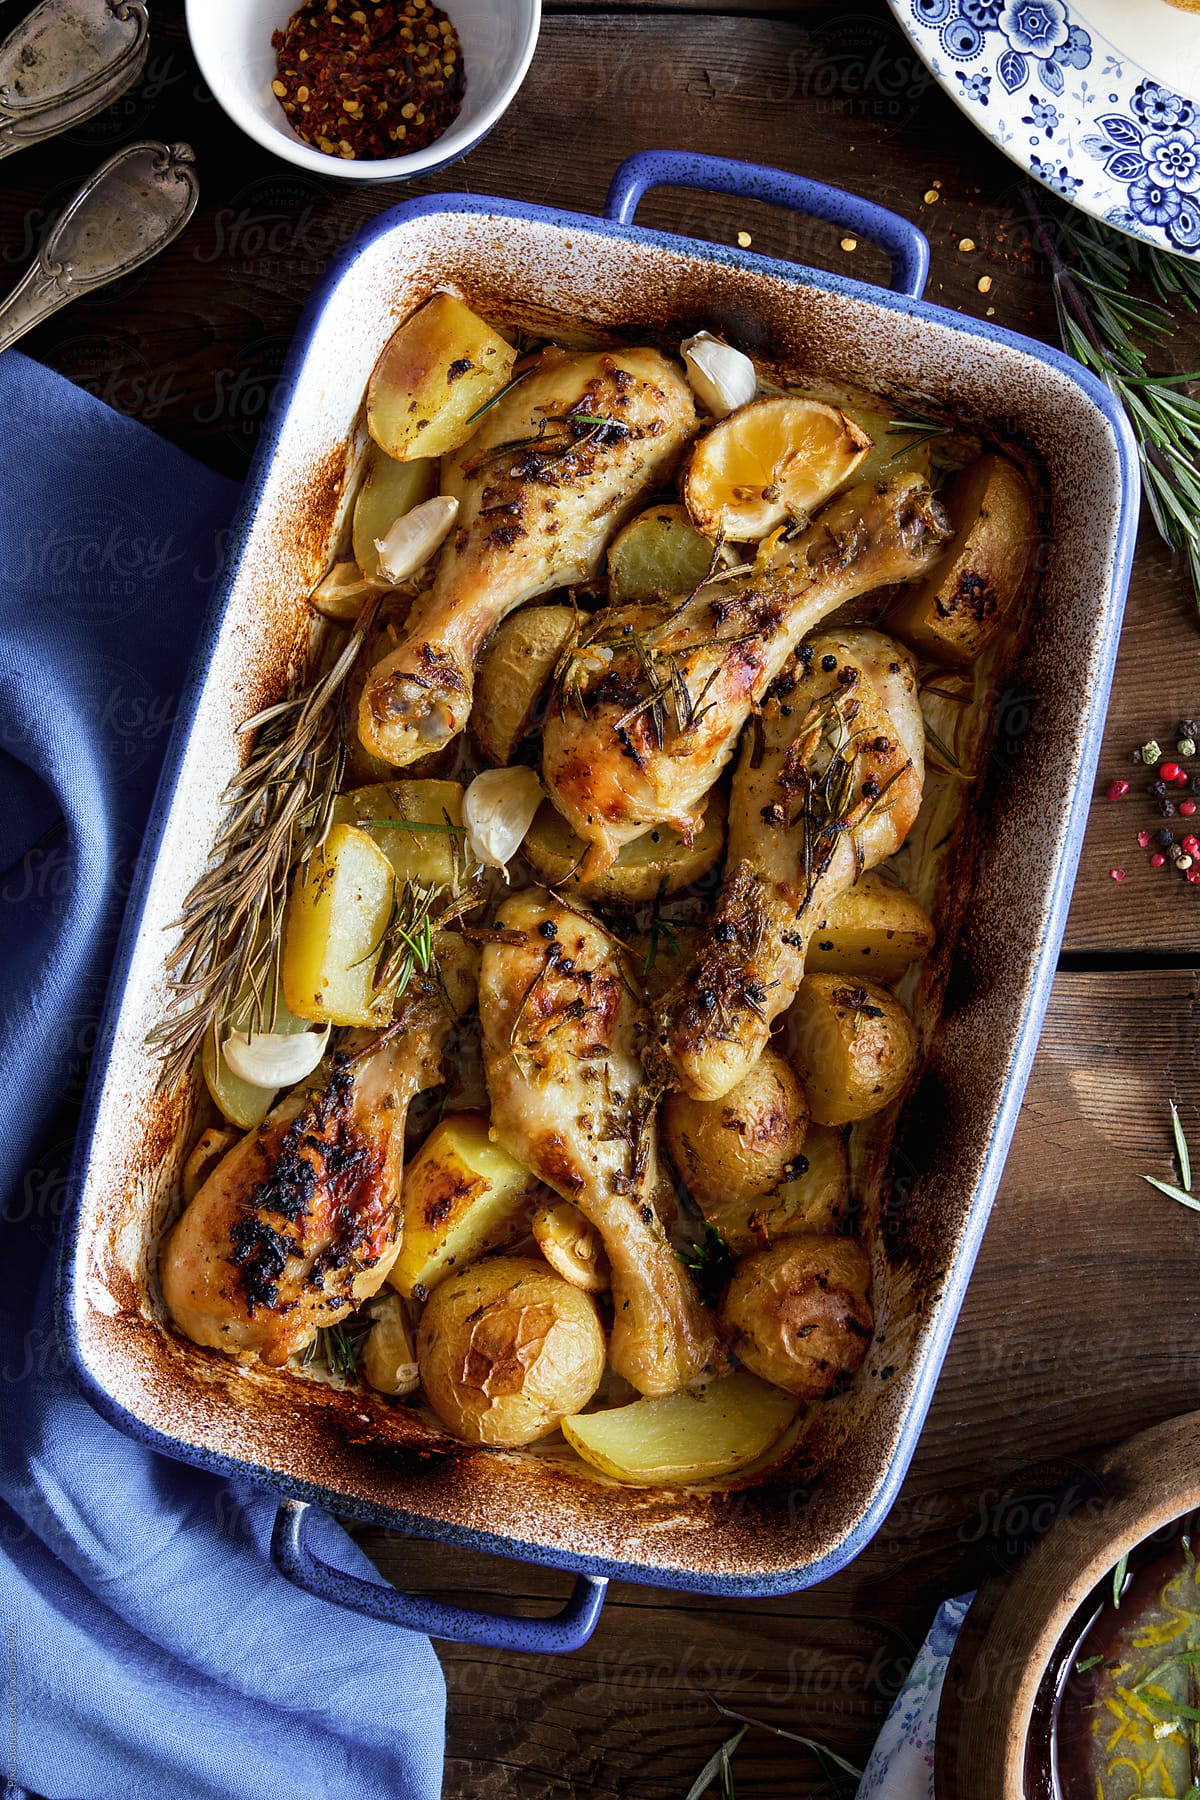 Food: roasted chicken legs on bed of potatoes and herbs